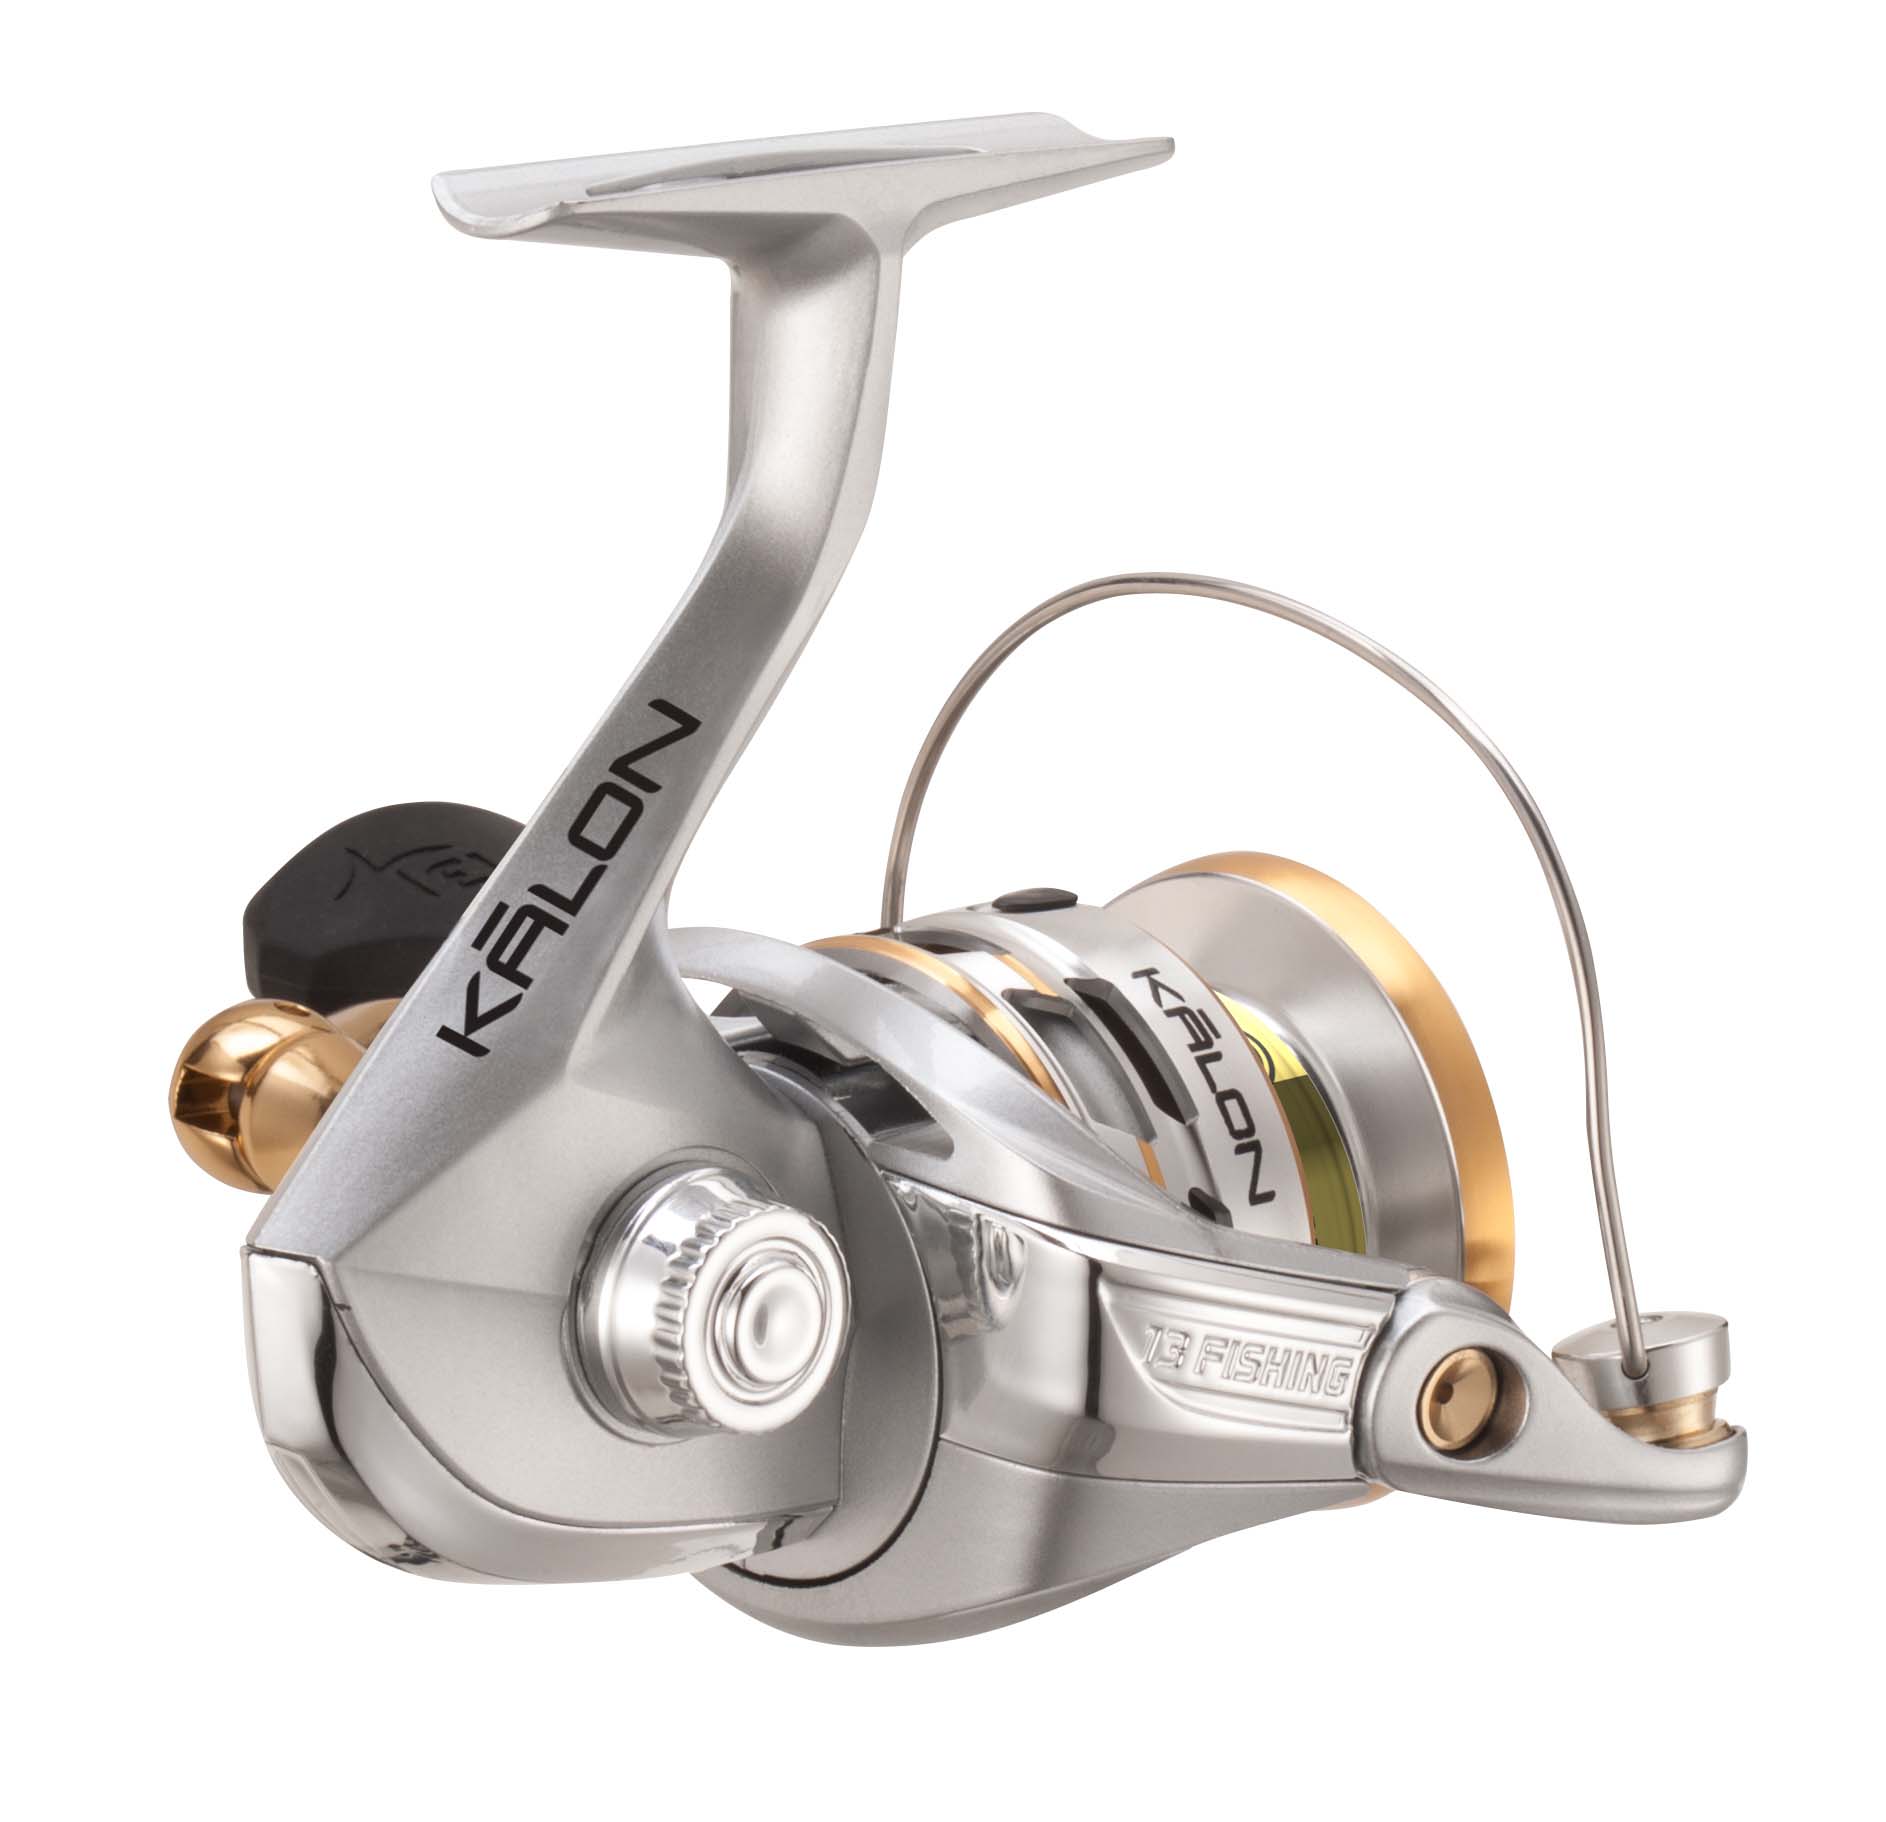 13 FISHING Ambition - Spinning Combo (1000 Size Reel)